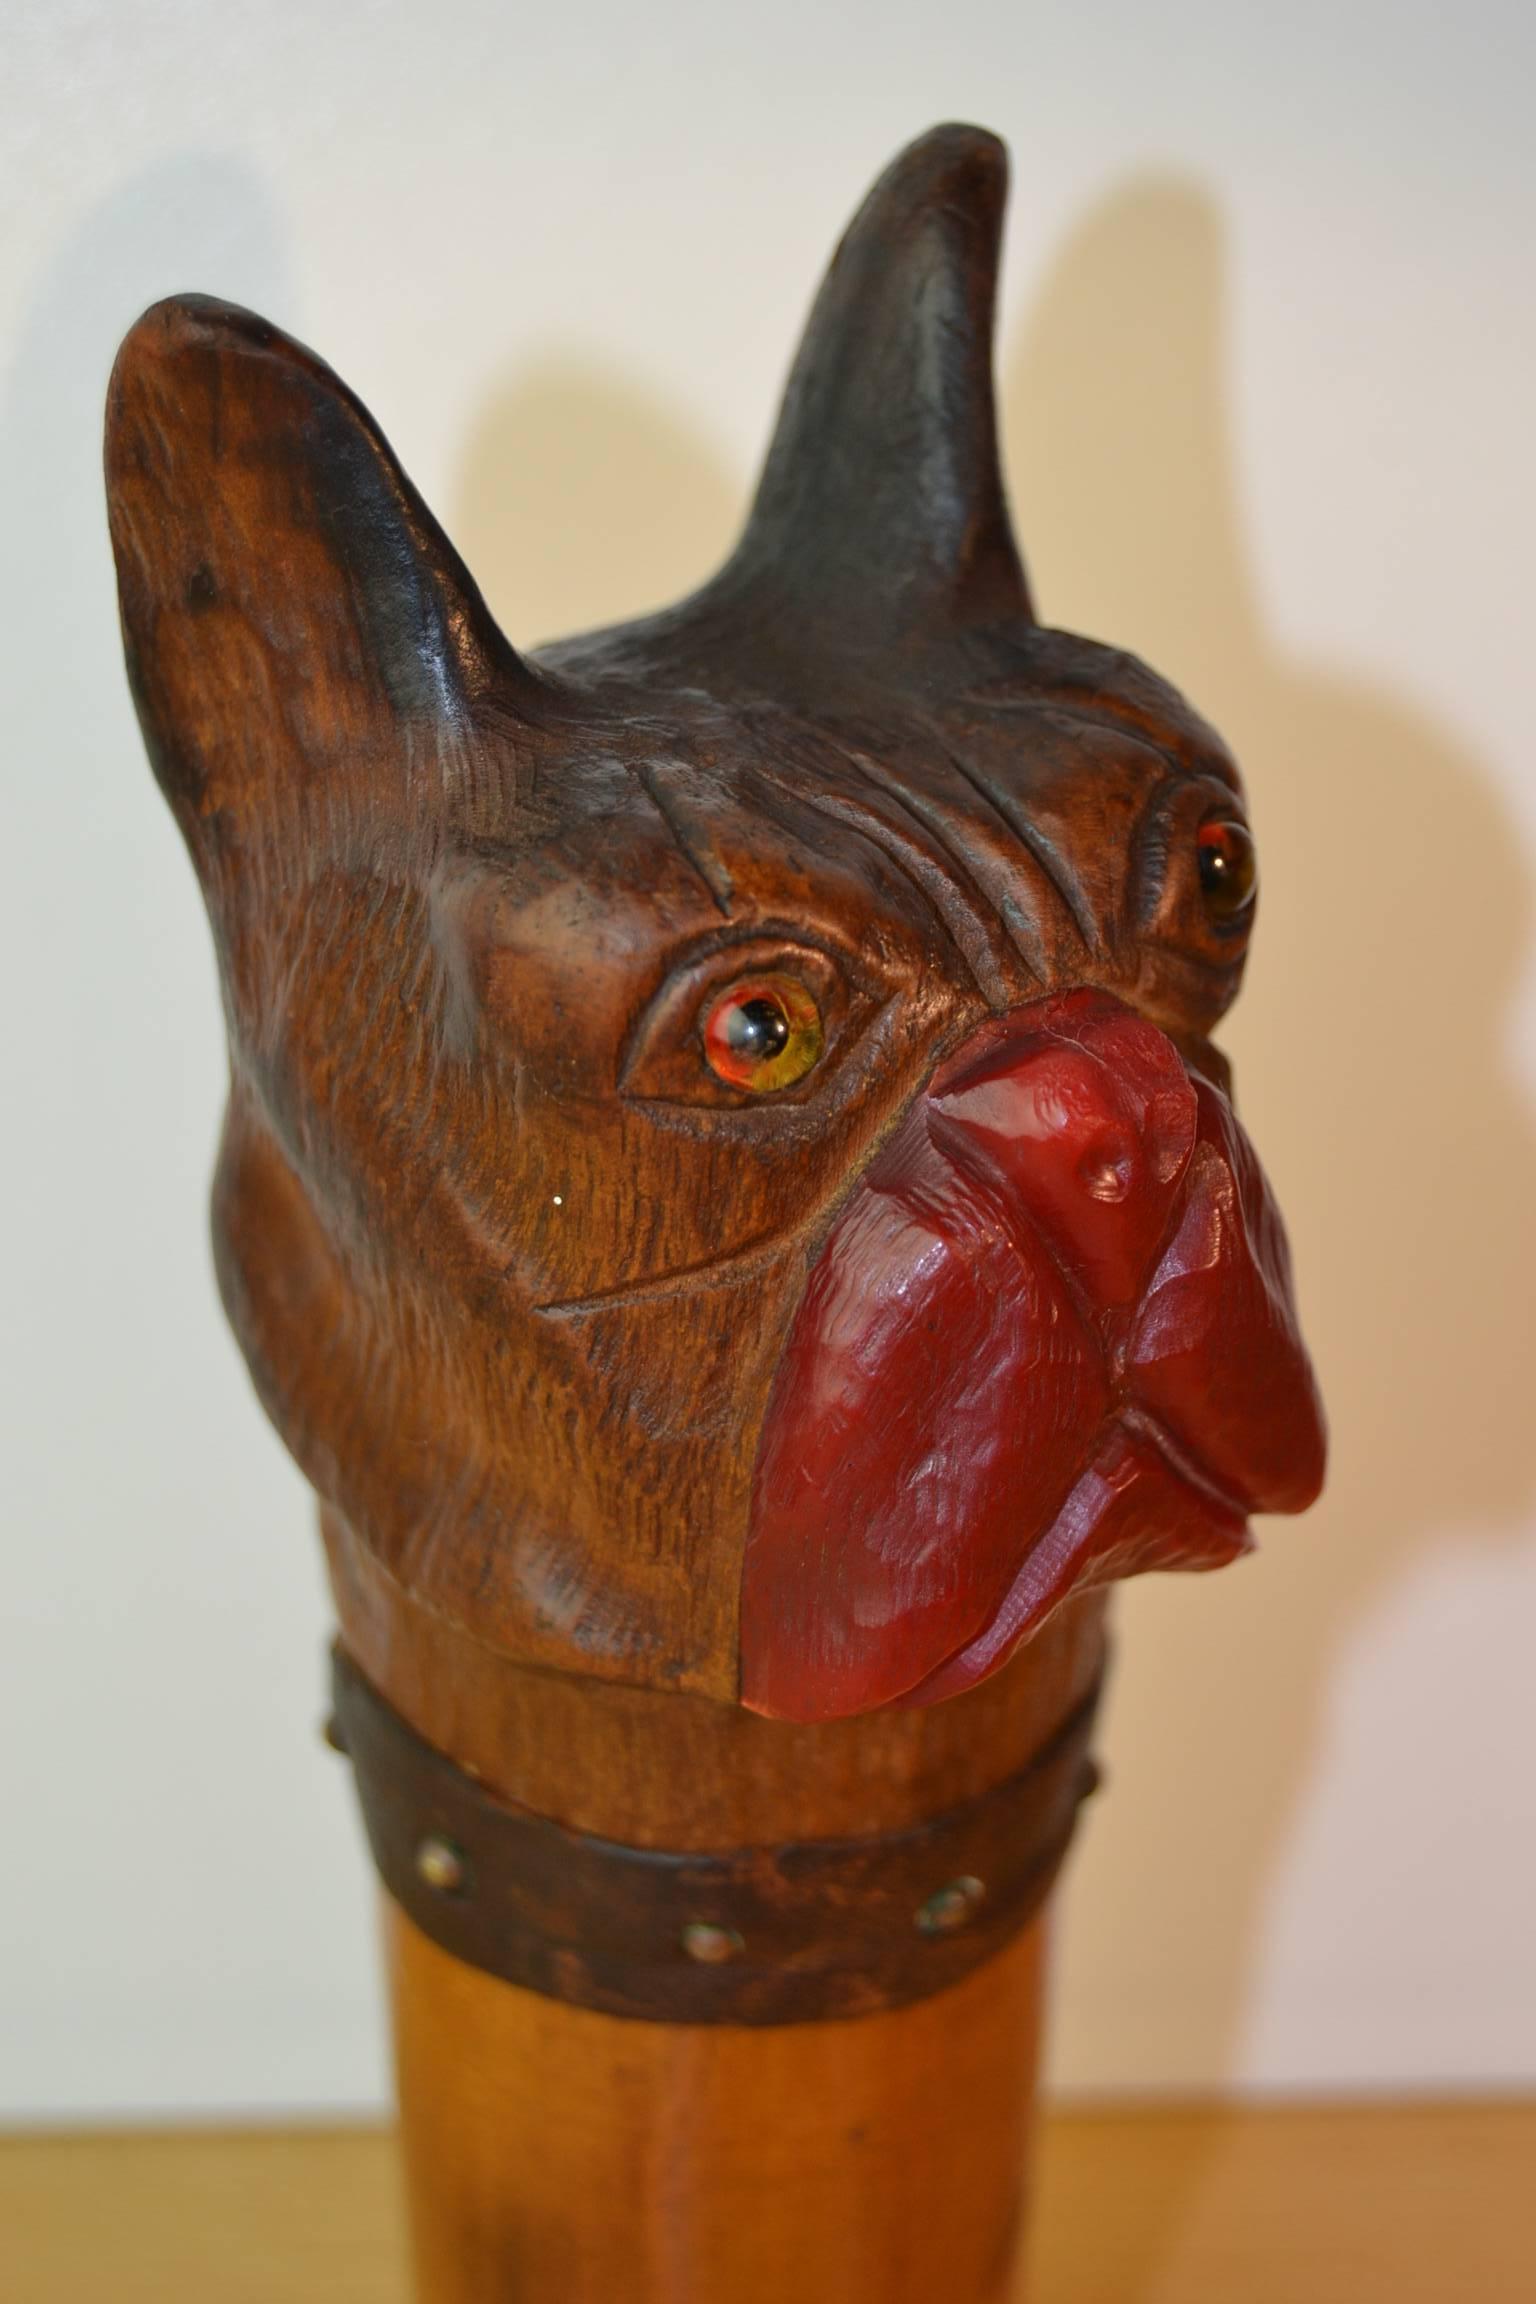 Unique carved wooden bulldog head for antique cane walking stick handle.
Antique wooden Folk Art dog figural sculpture from the early 20th century. 
Red bakelite nose, glass eyes and leather collar with copper nails.
Art Nouveau early Art Deco